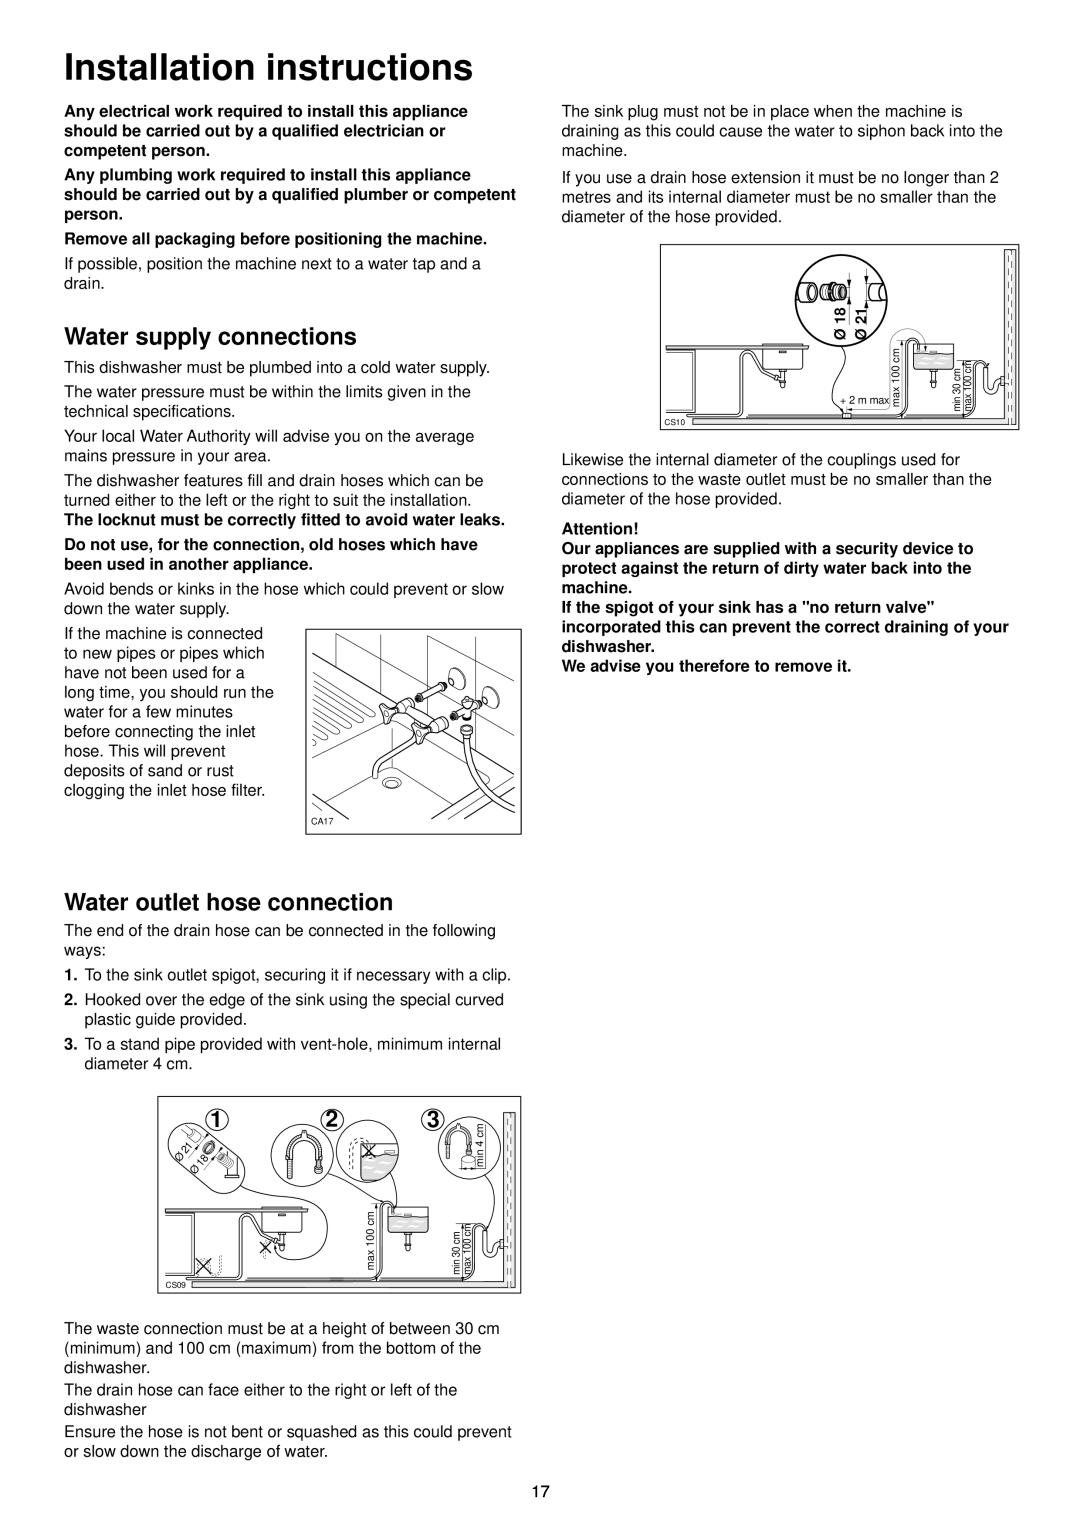 Zanussi DE 6850 manual Installation instructions, Water supply connections, Water outlet hose connection 